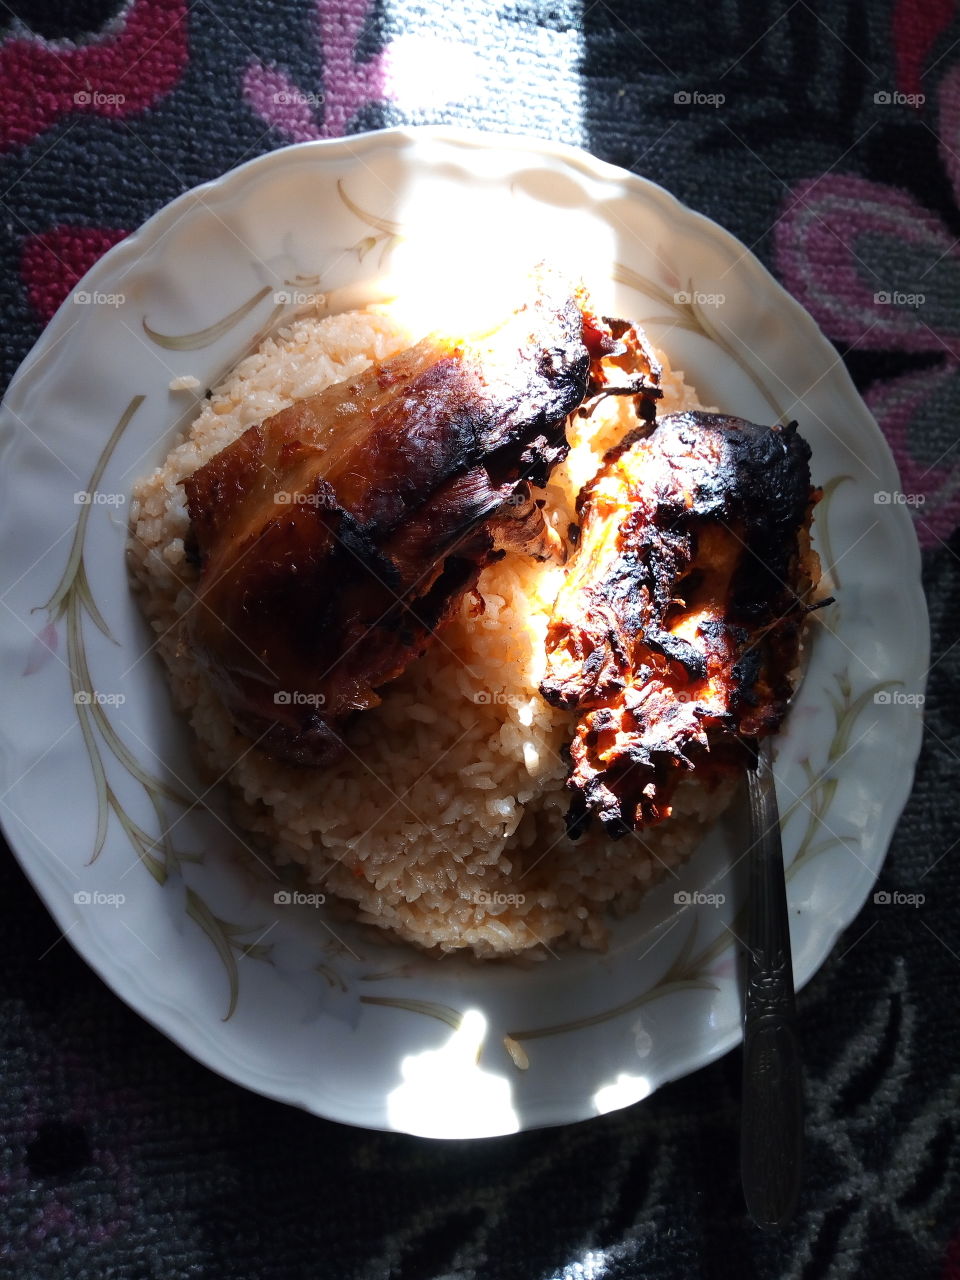 A dish of rice and two pieces of grilled chicken